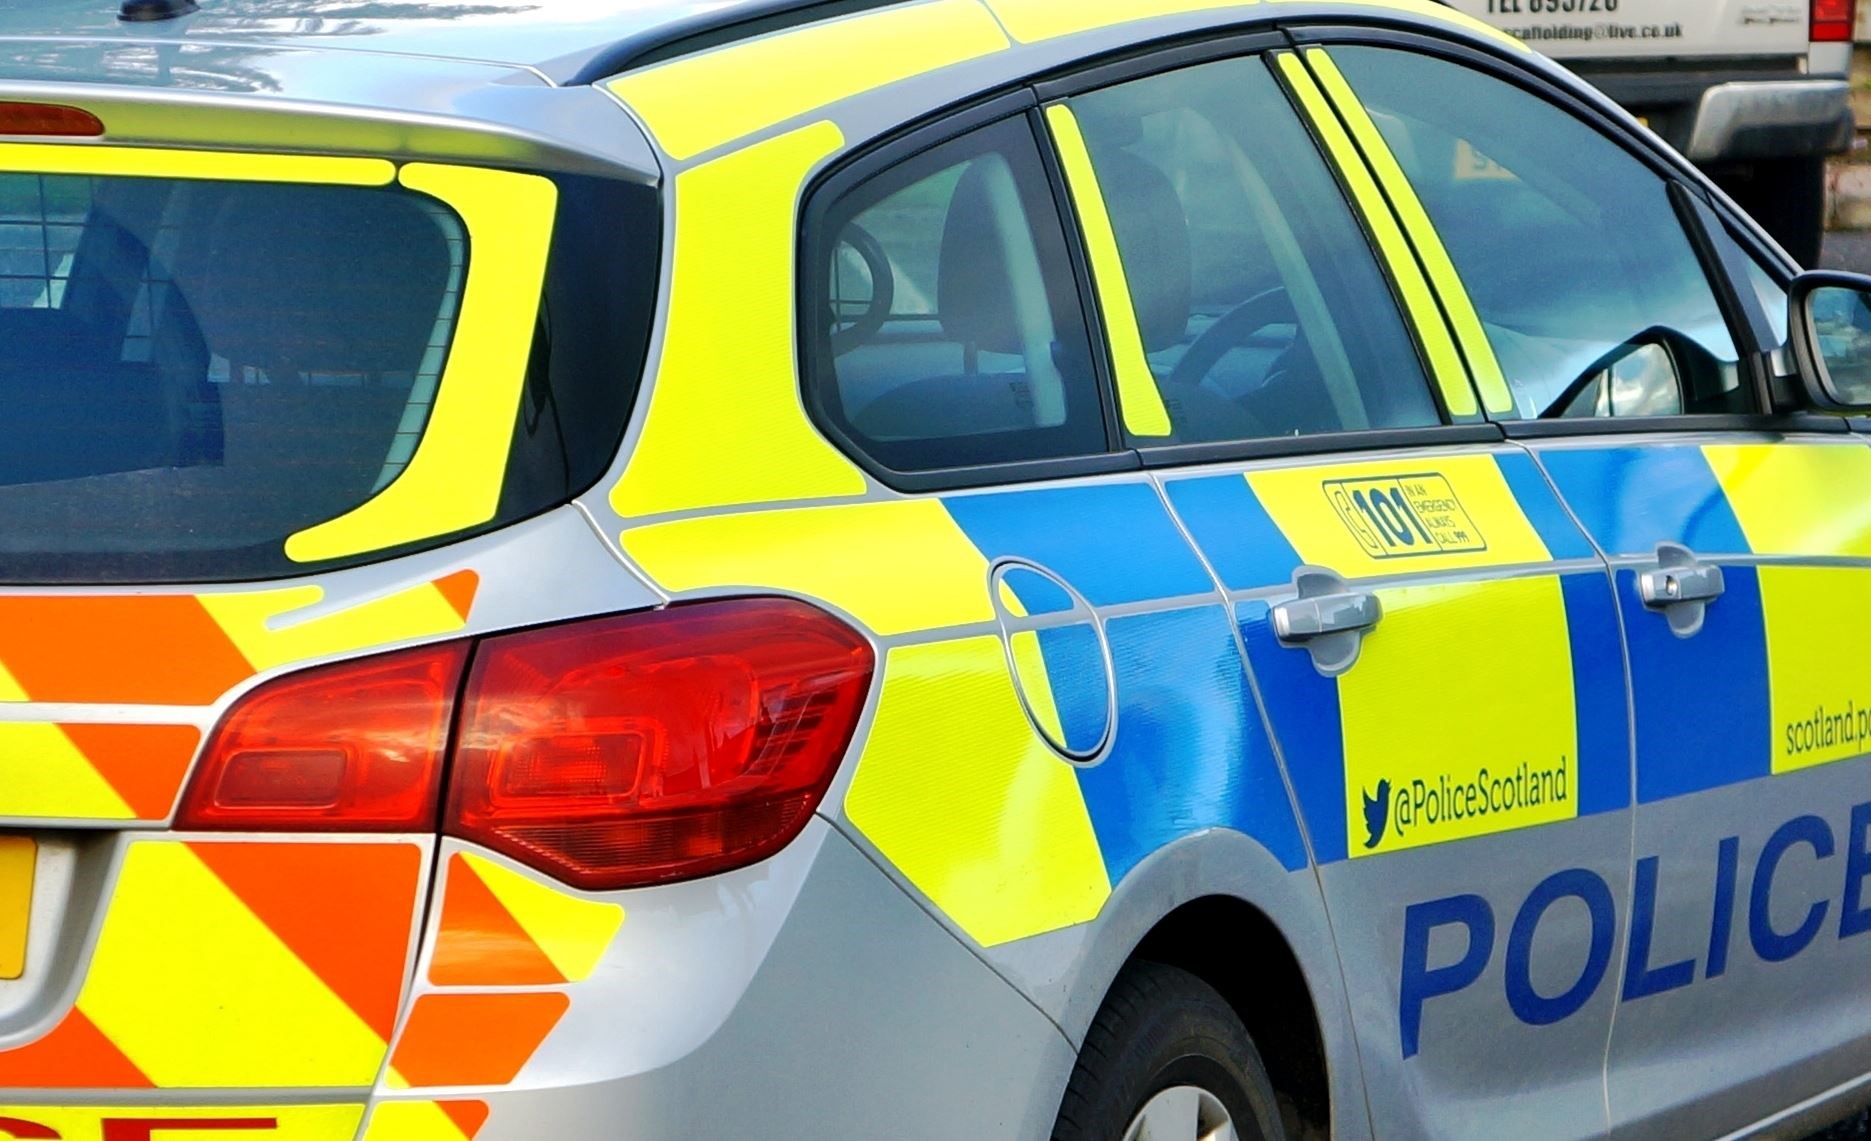 Police issued an on the spot fine after the two-vehicle collision near Tain